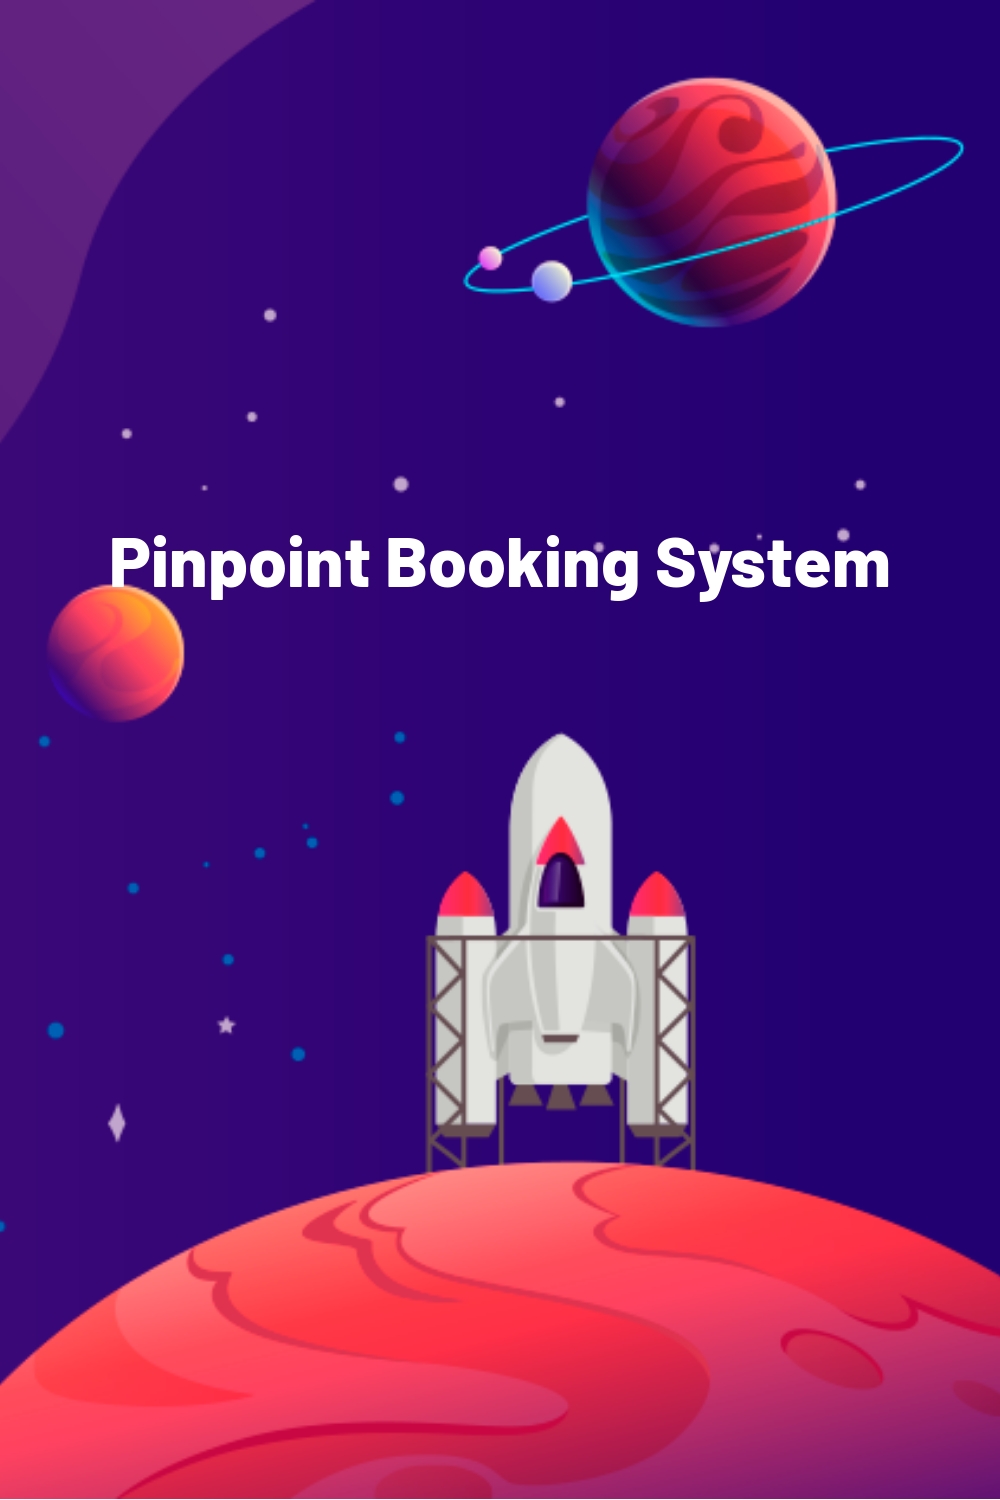 Pinpoint Booking System